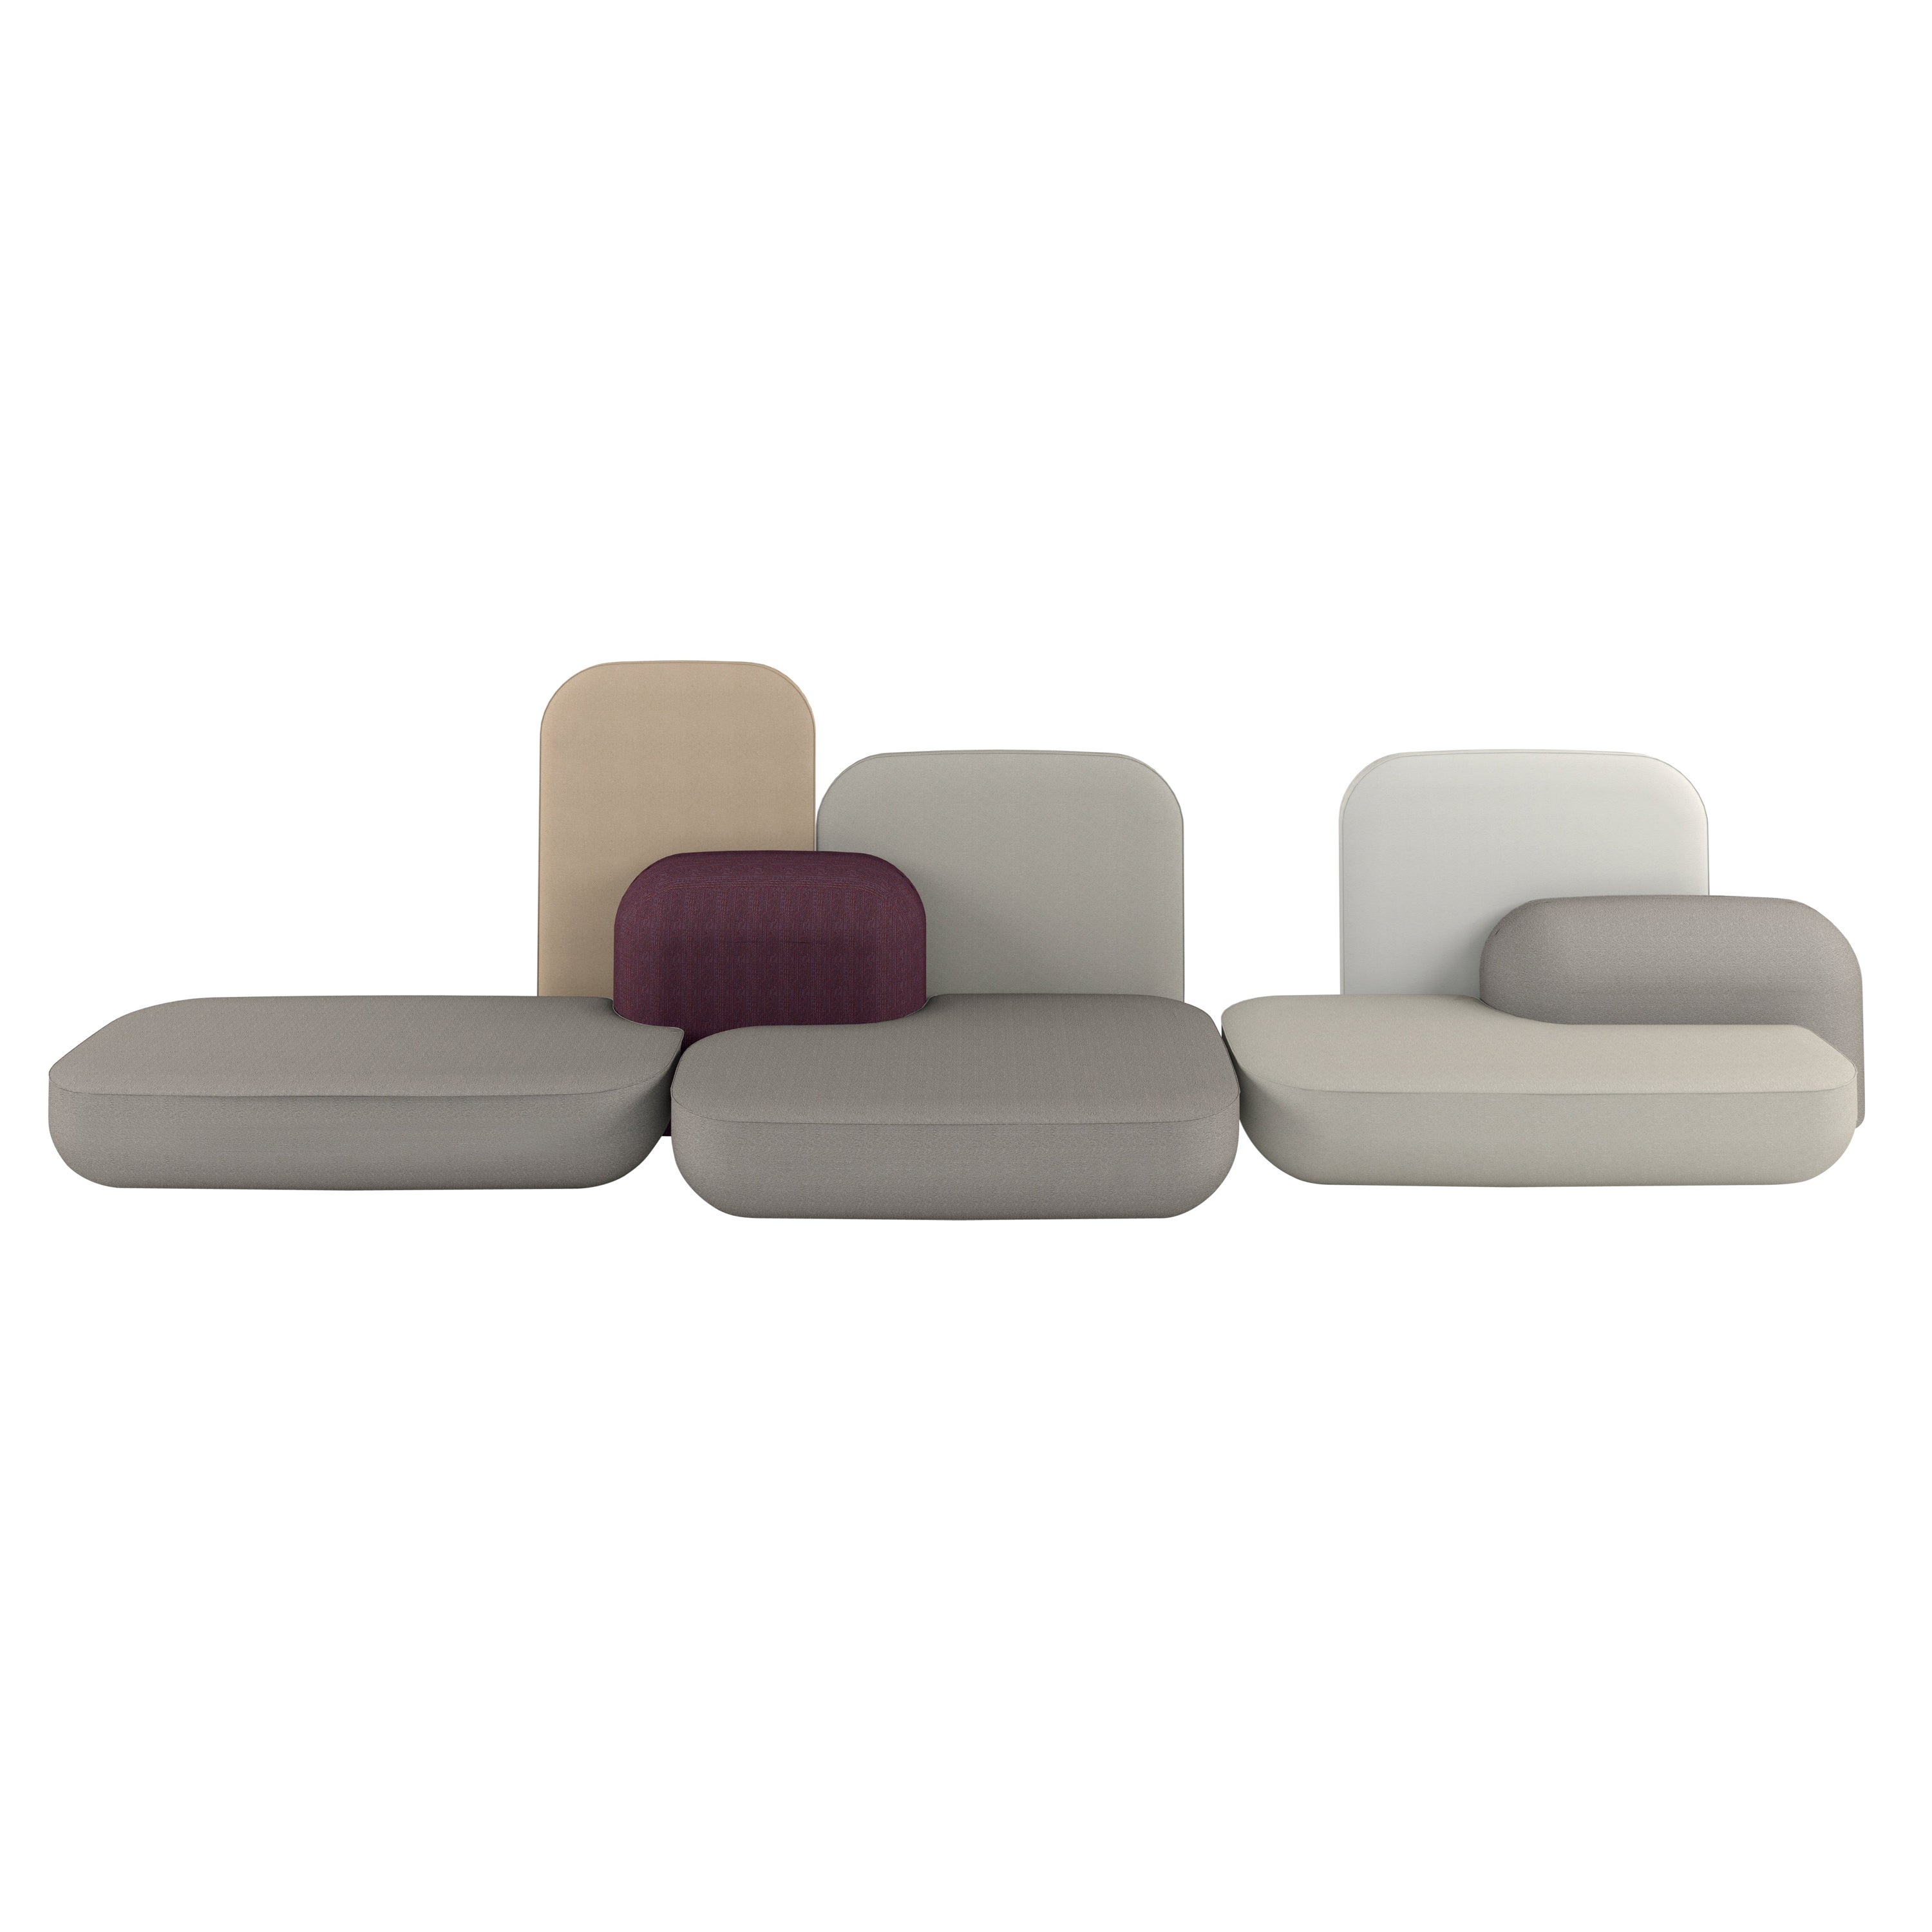 Alias Okome 008 Set of Grey and Beige Upholstered Seats with Backrest by Nendo For Sale